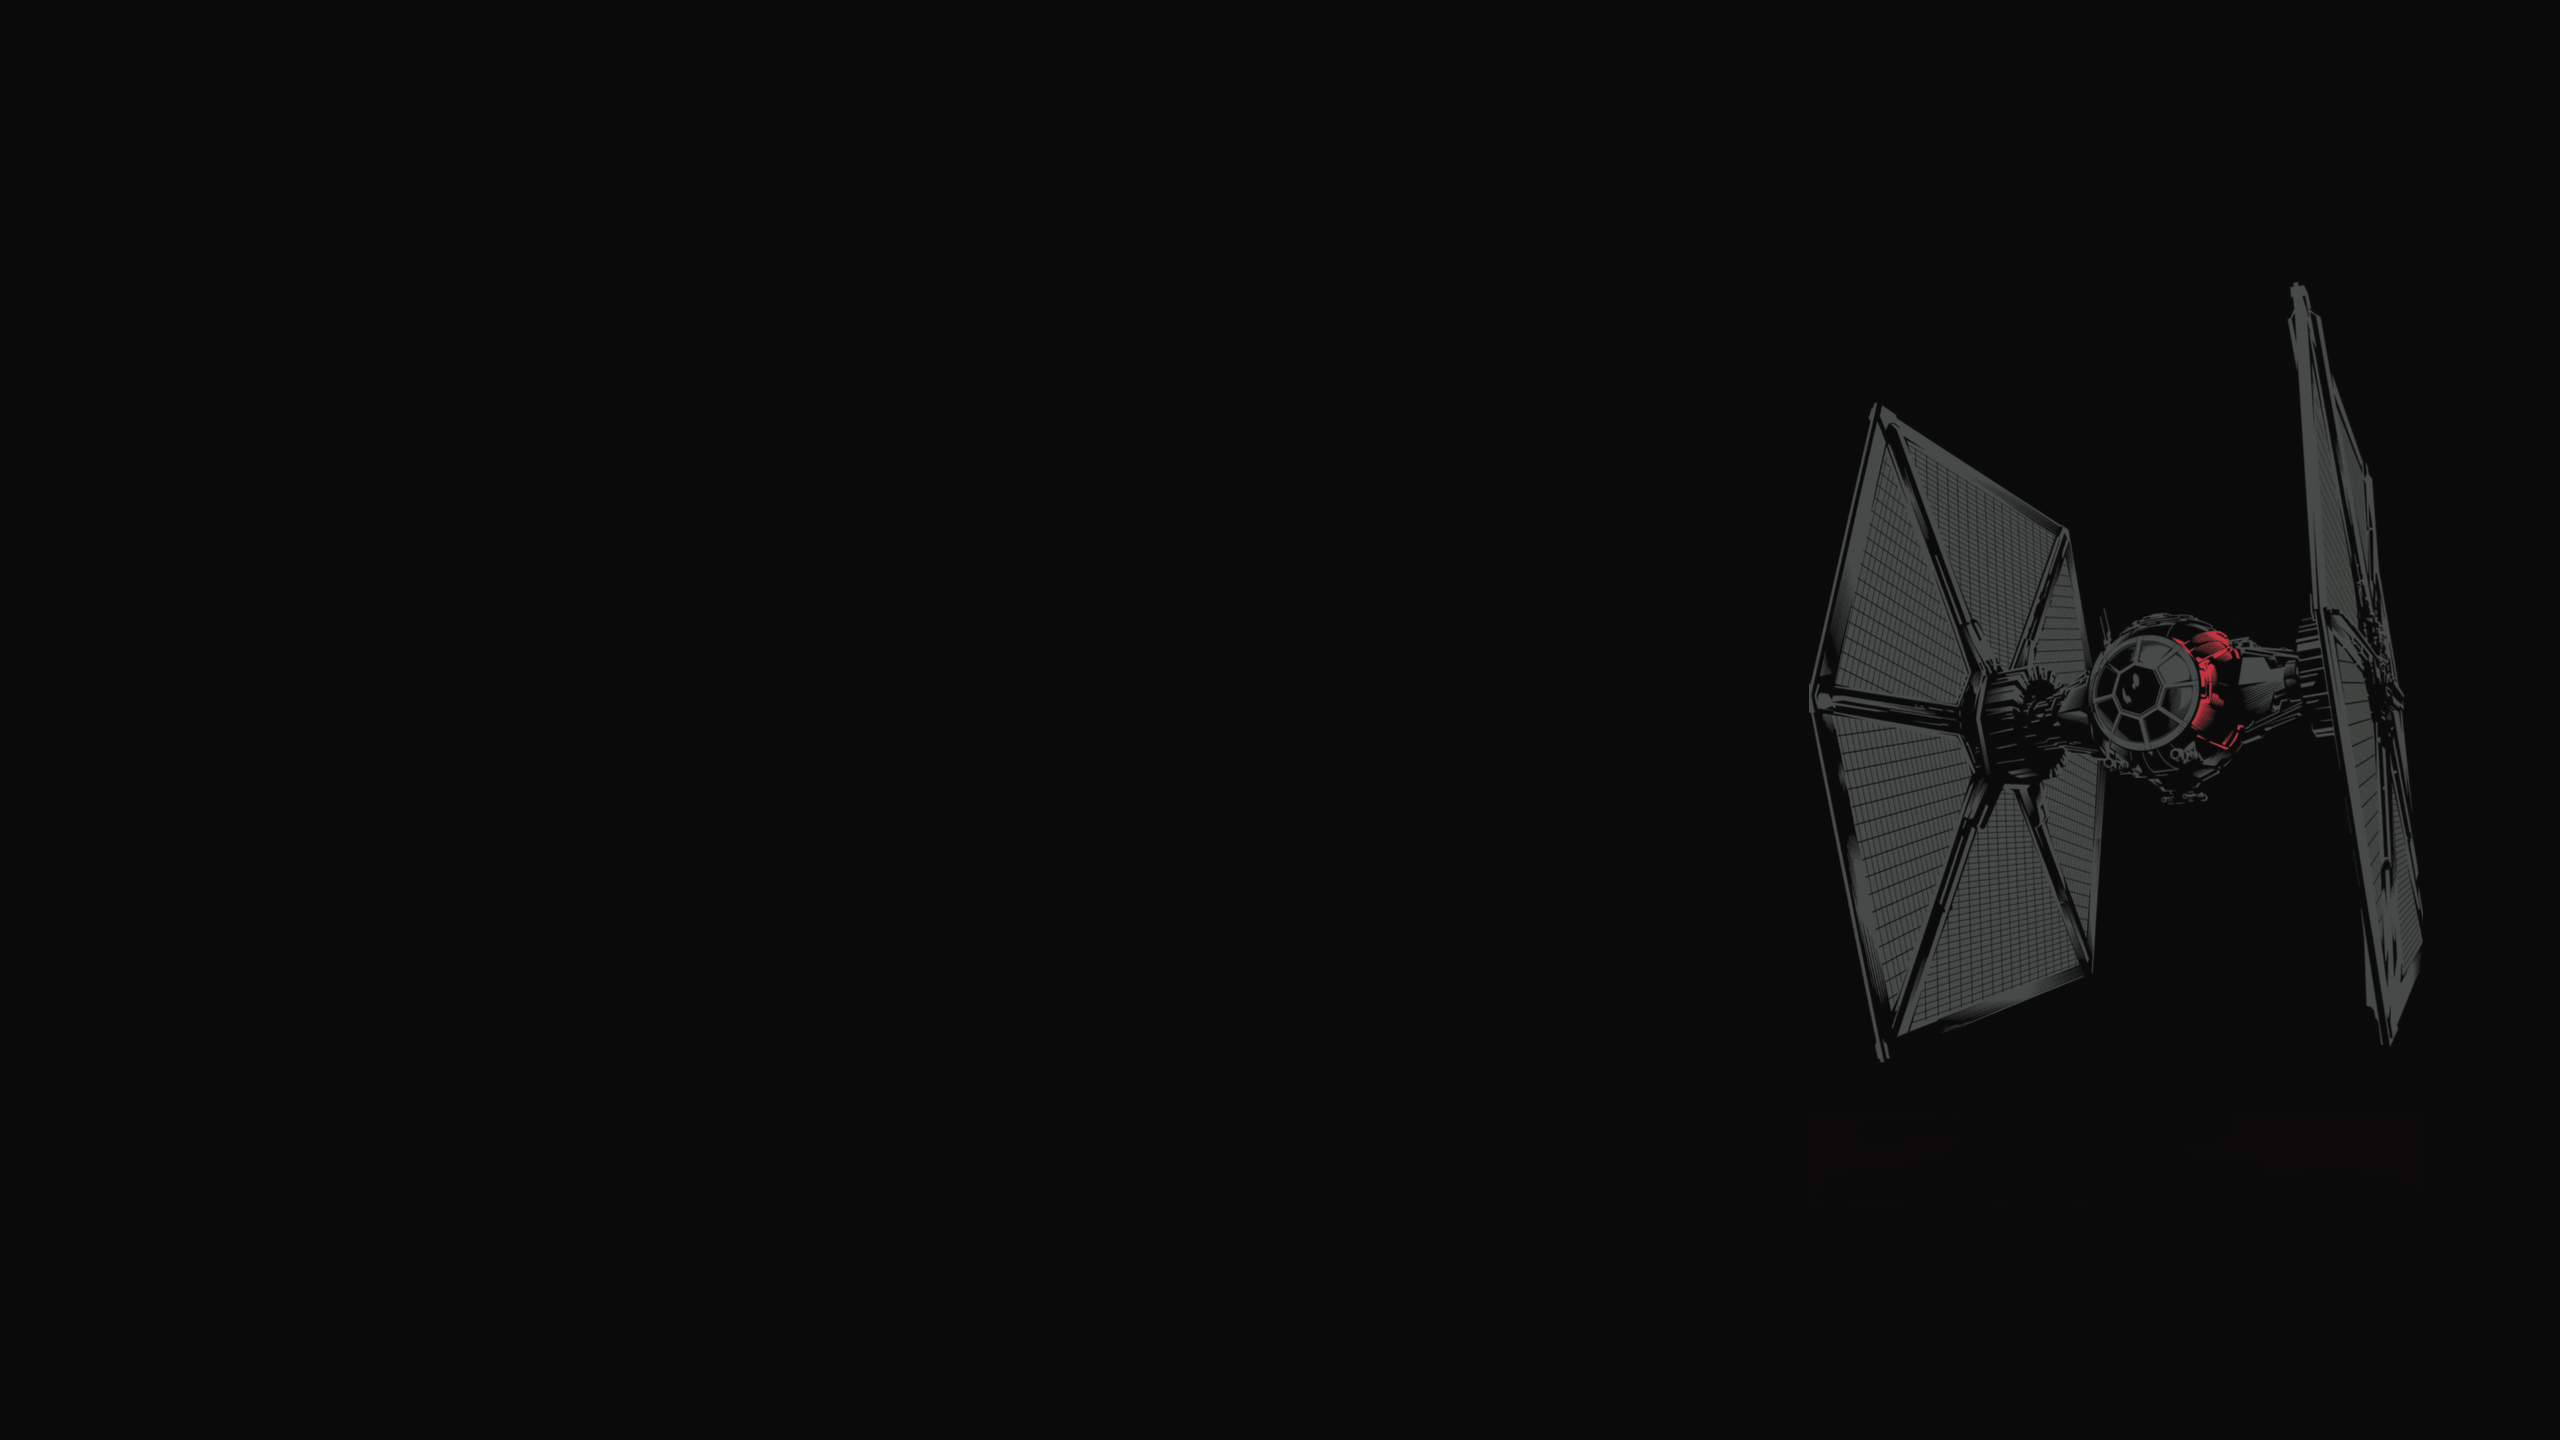 2560x1440 I made a wallpaper out of that TIE Fighter image from the toy leak. Enjoy! : r/StarWars